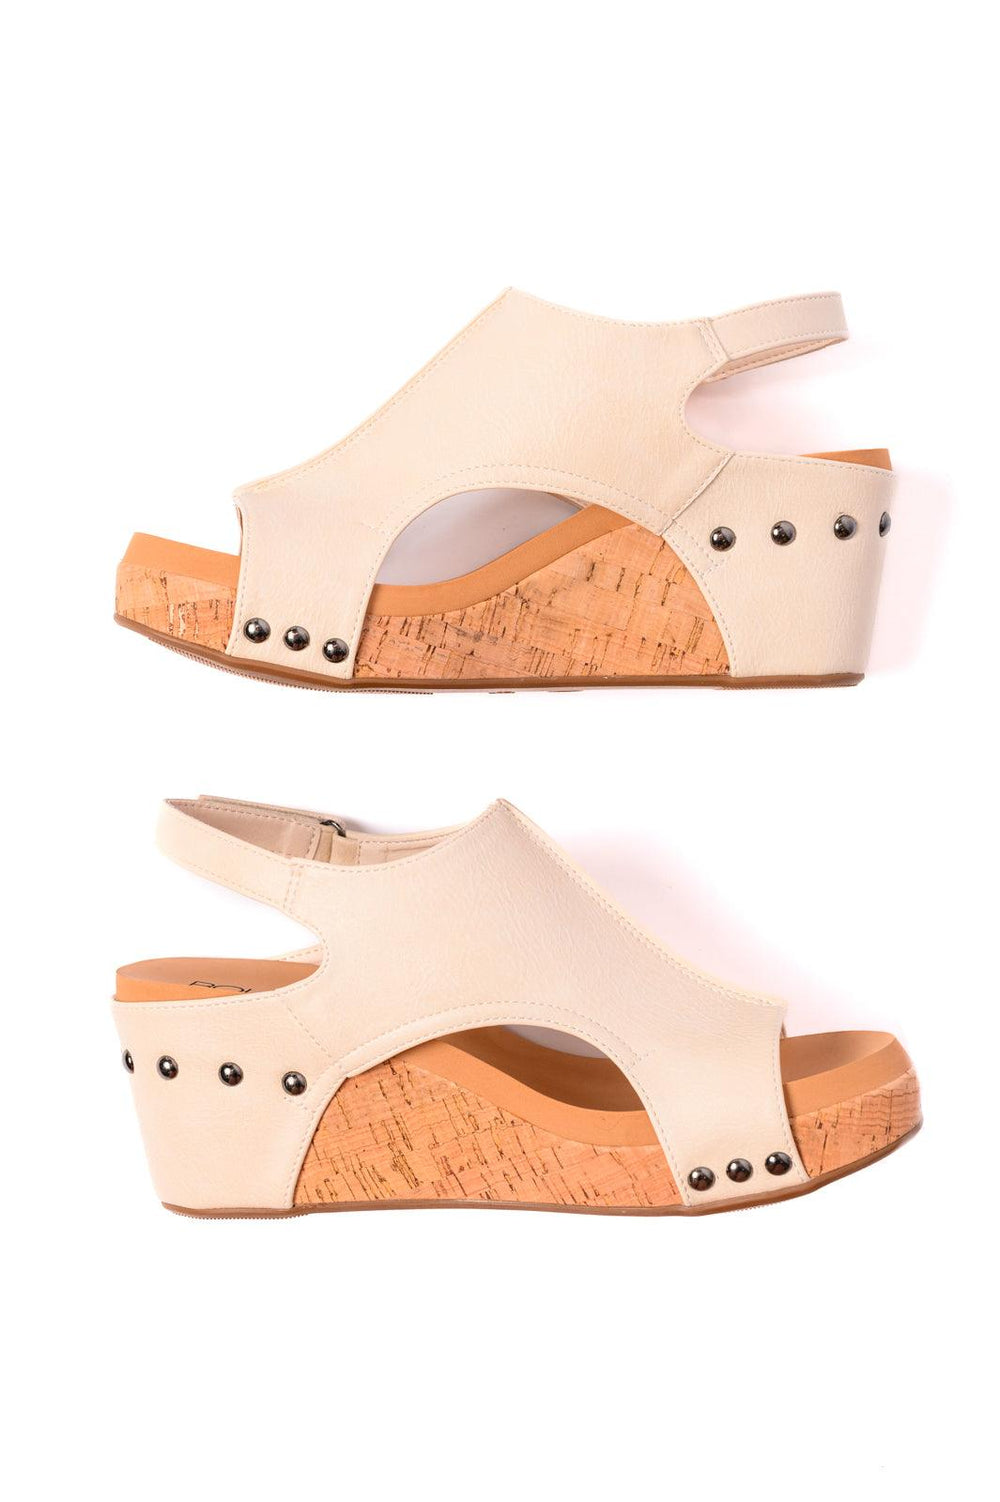 Carley Wedge Sandals in Cream Shoes